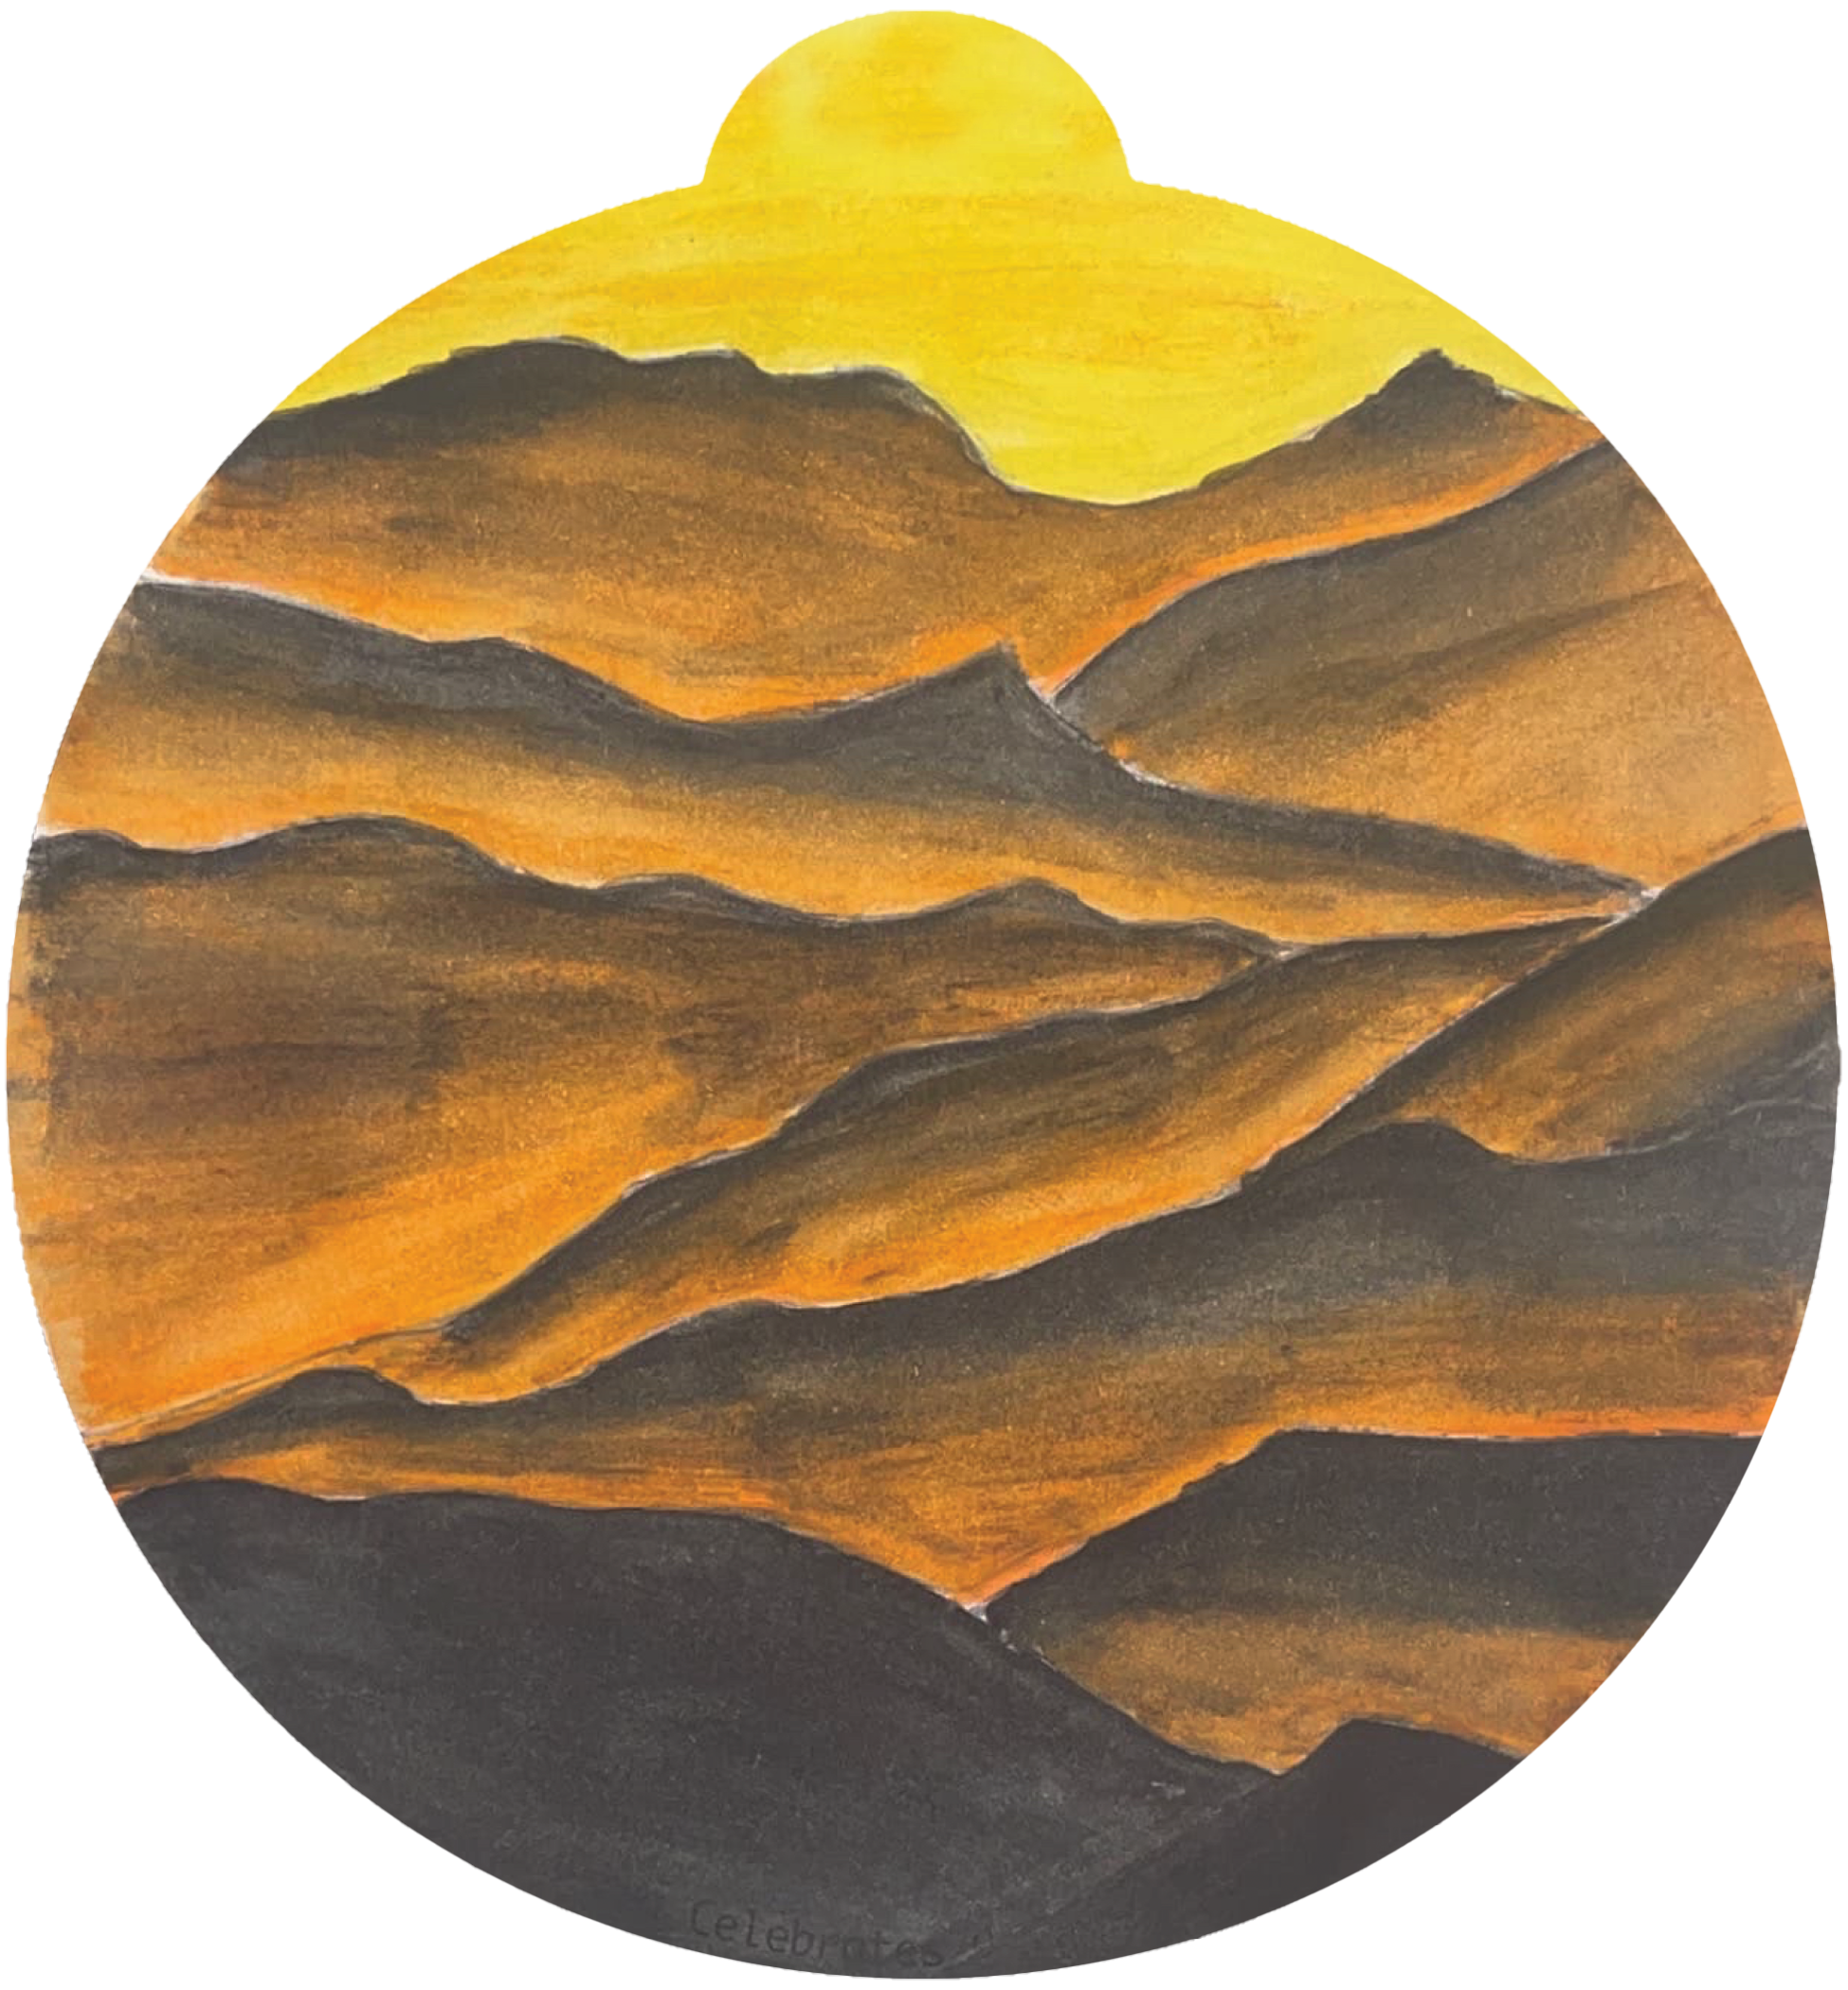 ornament depicting mountains